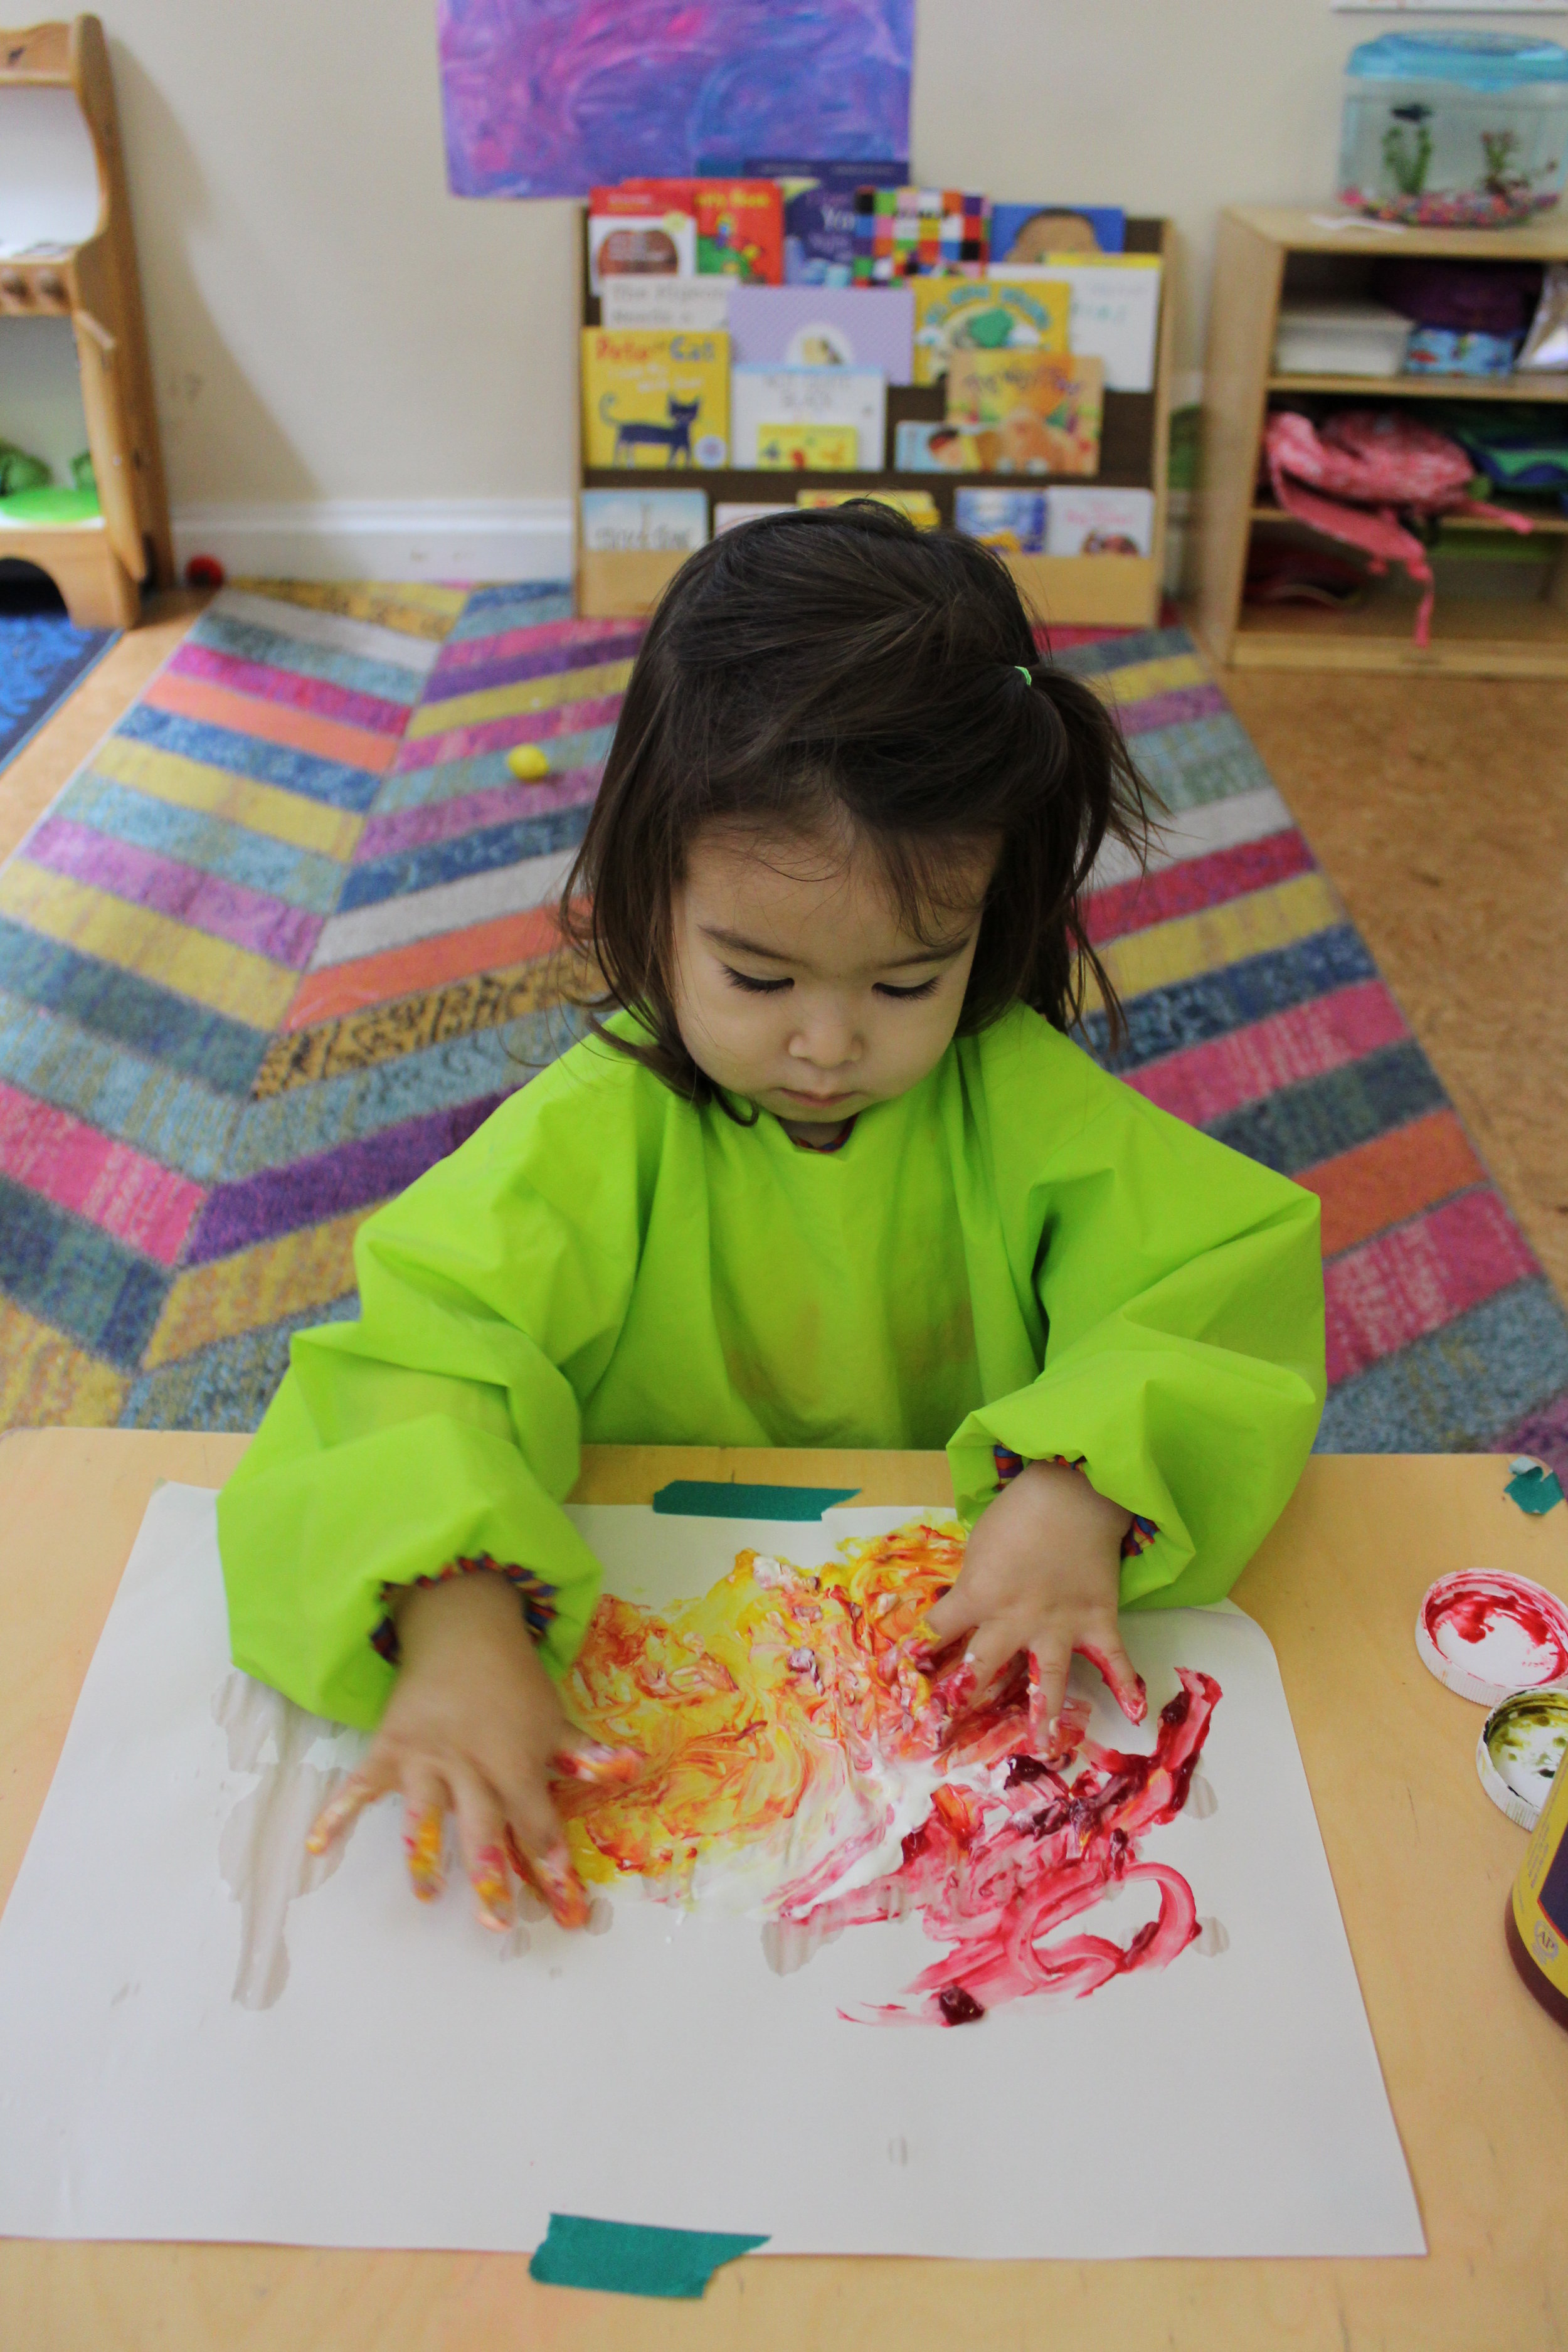      Fingerpaint is a kind of paint intended to be applied with the fingers. It allows children to use their imagination and create. It encourages cognitive development and strengthens the hand and fingers which helps with fine motor skills. Children